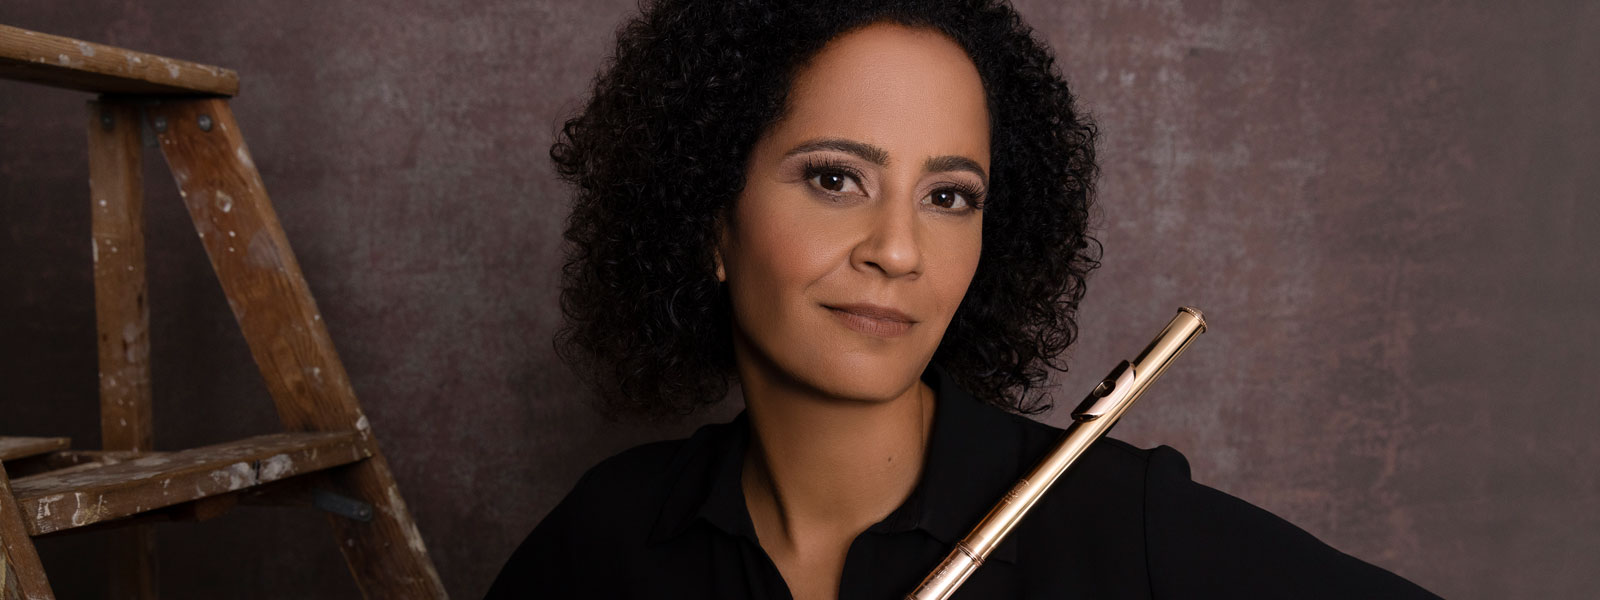 Black woman in a black shirt holding a flute